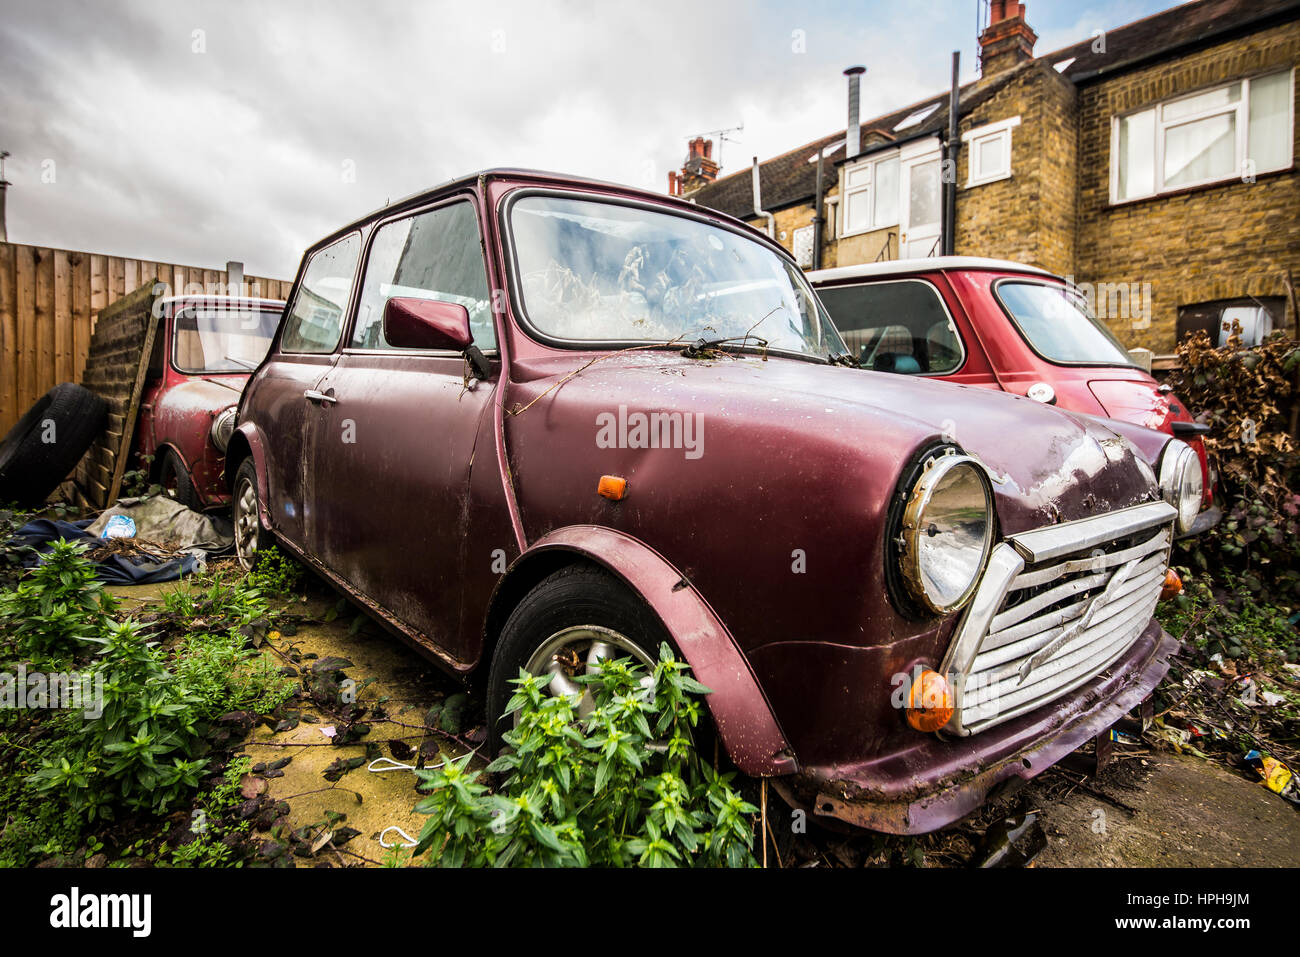 A group of four abandoned British Leyland Minis left to deteriorate on an overgrown parking lot Stock Photo